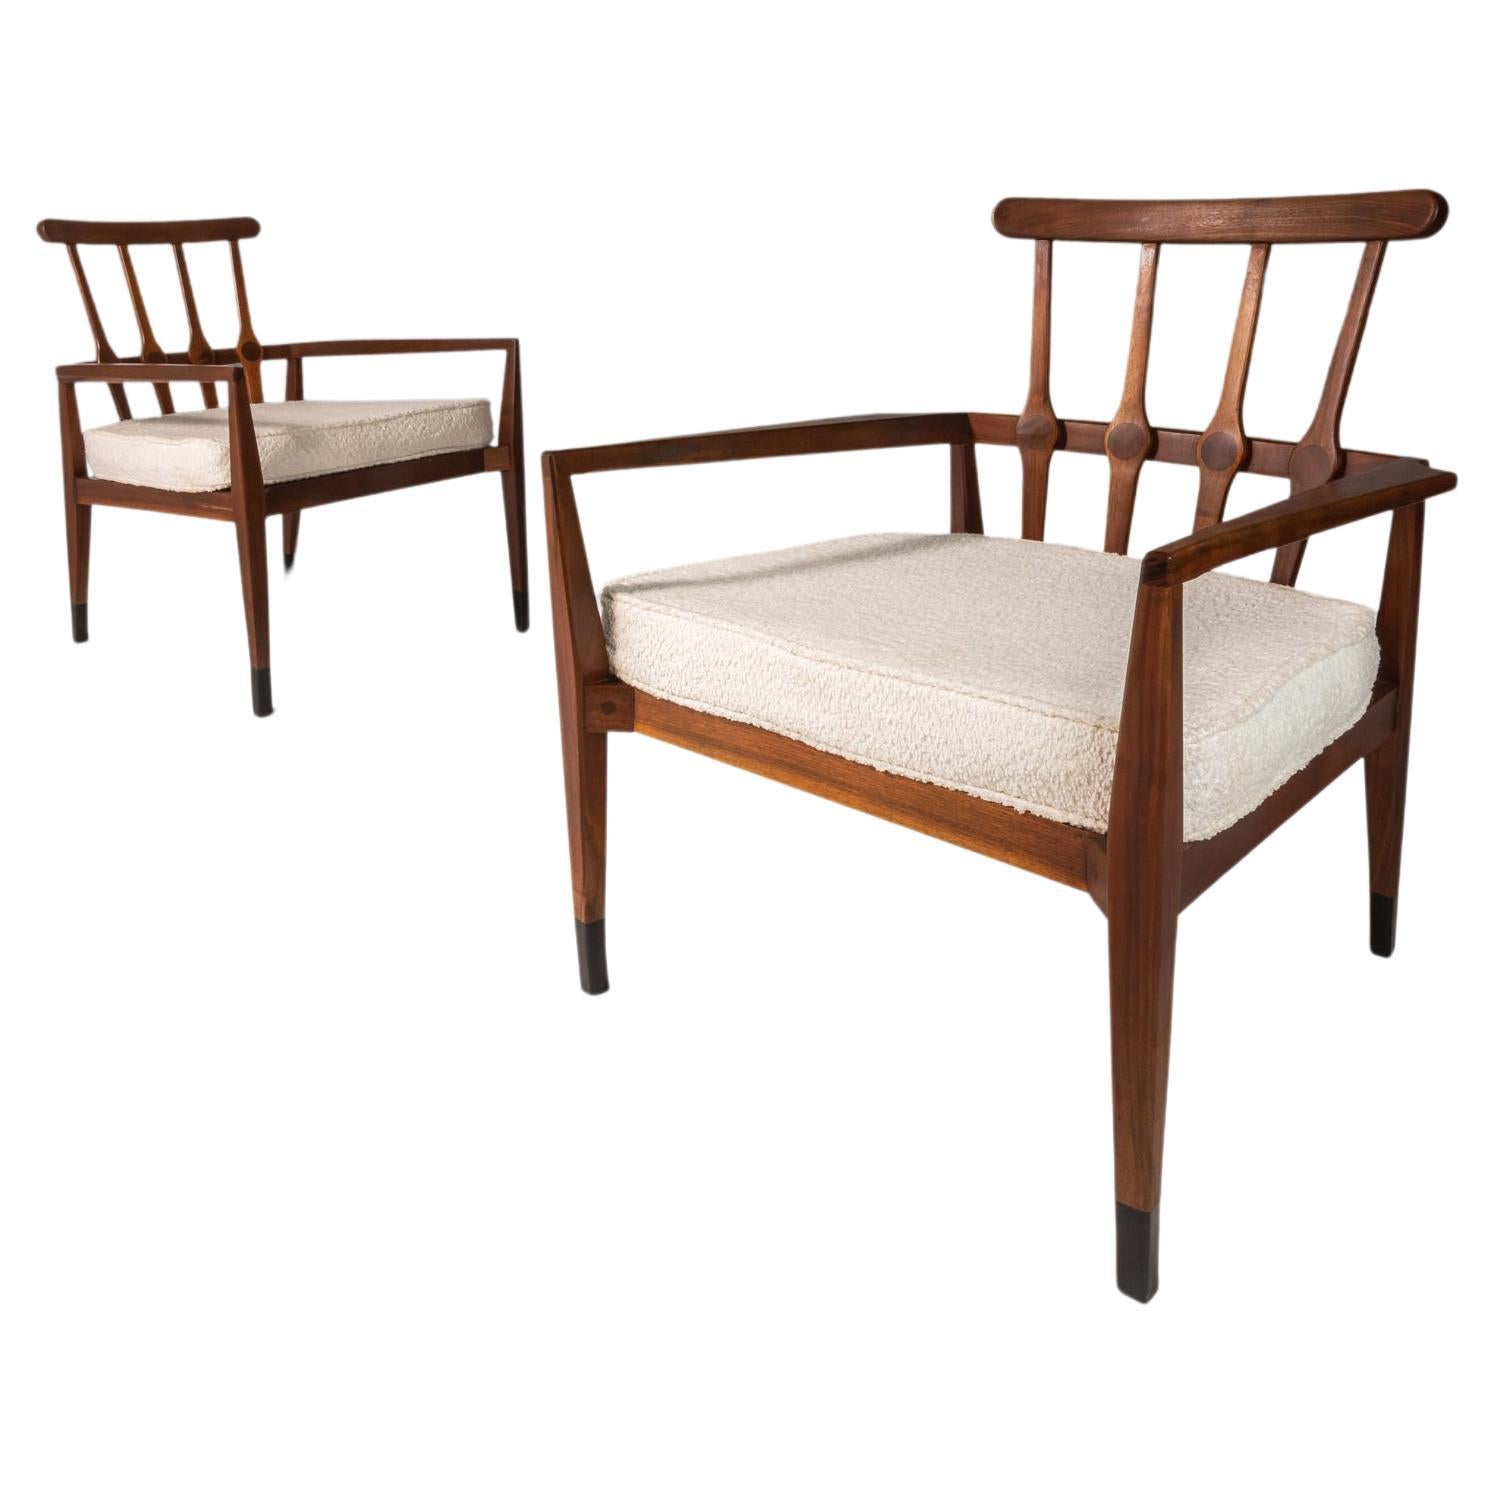 Set of Two (2) Angular Arm Chairs in Walnut & Bouclé by Foster McDavid, c. 1960s